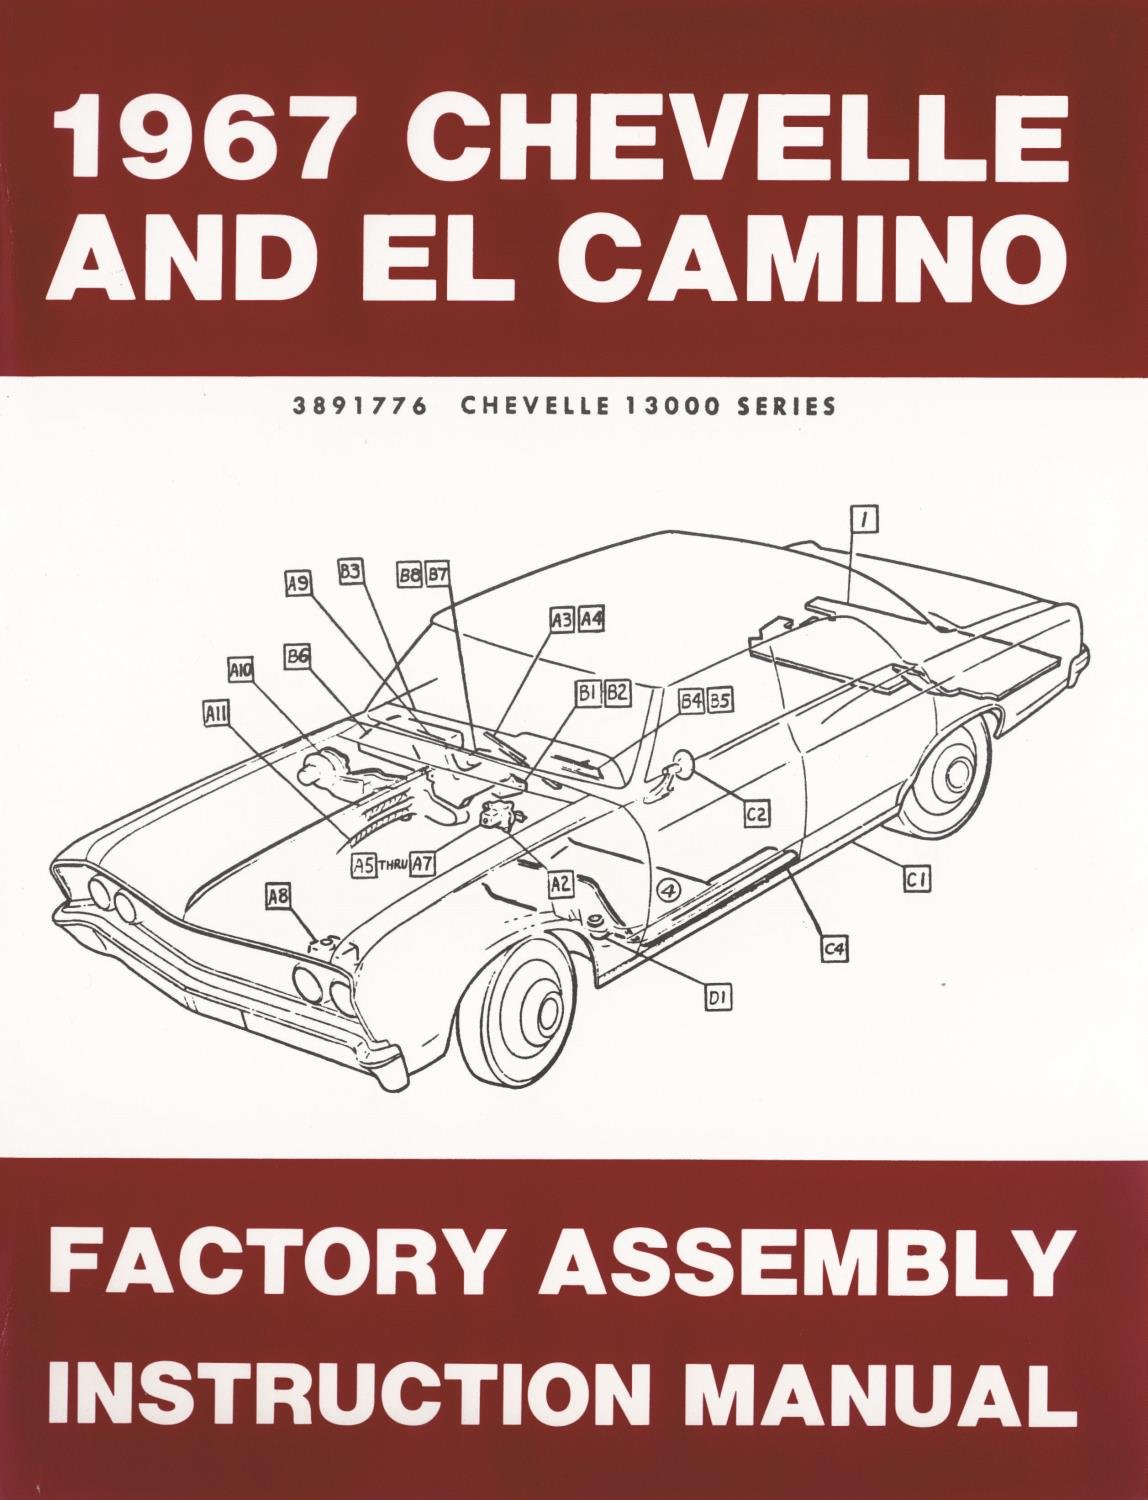 Factory Assembly Instruction Manual for 1967 Chevrolet Chevelle and El Camino